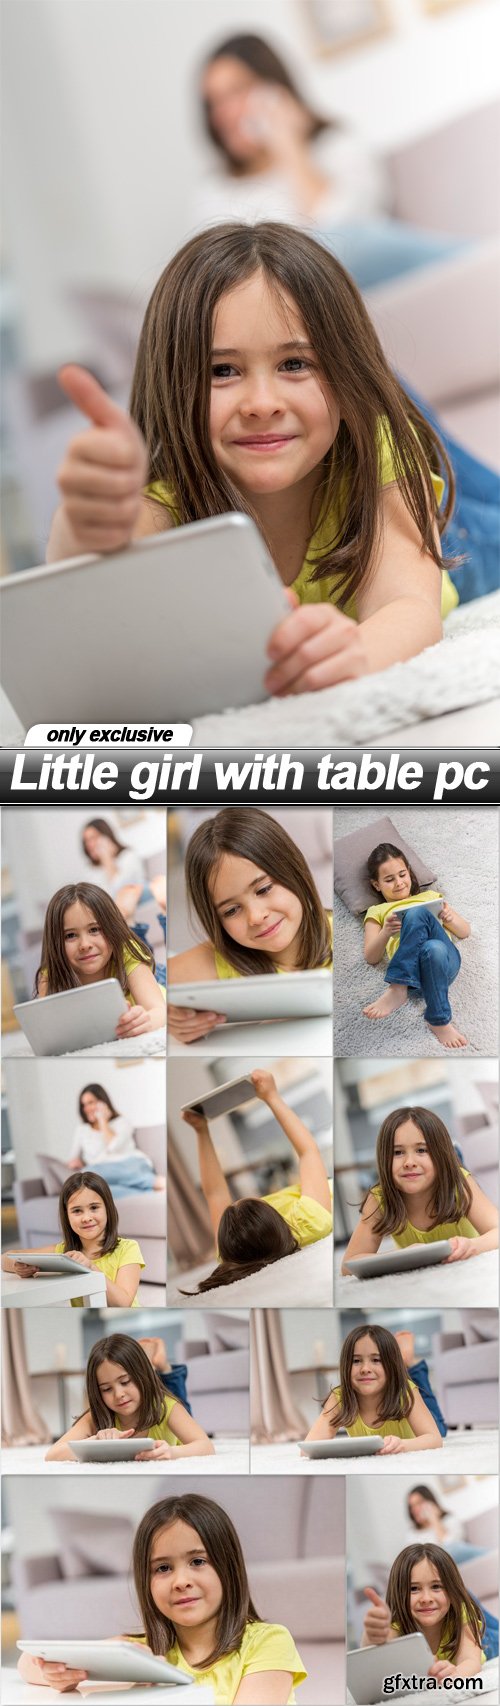 Little girl with table pc - 10 UHQ JPEG